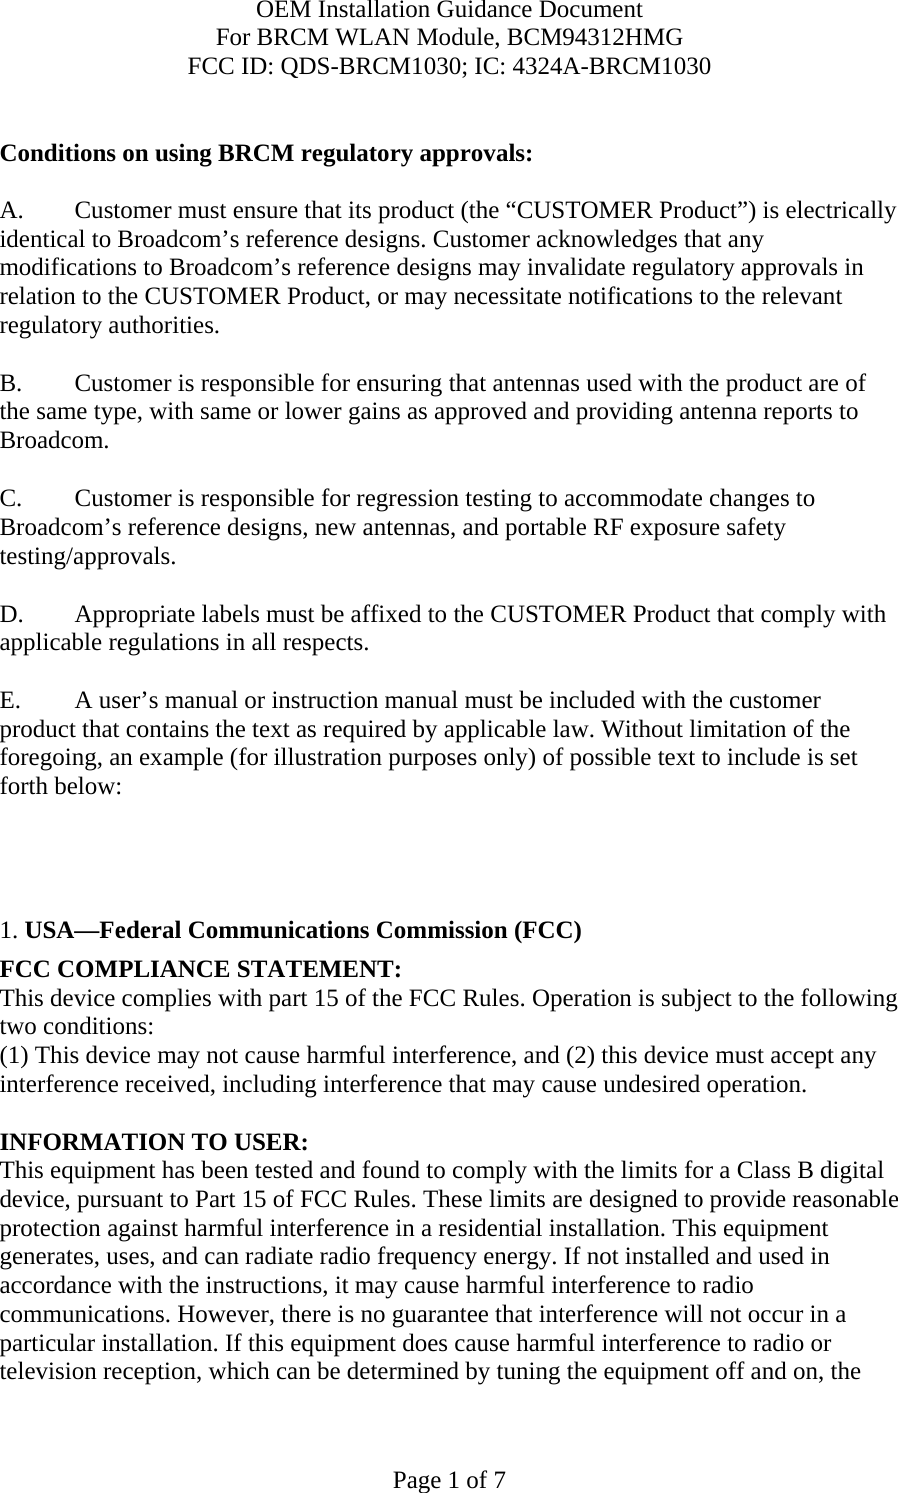 OEM Installation Guidance Document For BRCM WLAN Module, BCM94312HMG FCC ID: QDS-BRCM1030; IC: 4324A-BRCM1030  Page 1 of 7  Conditions on using BRCM regulatory approvals:   A.  Customer must ensure that its product (the “CUSTOMER Product”) is electrically identical to Broadcom’s reference designs. Customer acknowledges that any modifications to Broadcom’s reference designs may invalidate regulatory approvals in relation to the CUSTOMER Product, or may necessitate notifications to the relevant regulatory authorities.  B.   Customer is responsible for ensuring that antennas used with the product are of the same type, with same or lower gains as approved and providing antenna reports to Broadcom.  C.   Customer is responsible for regression testing to accommodate changes to Broadcom’s reference designs, new antennas, and portable RF exposure safety testing/approvals.  D.  Appropriate labels must be affixed to the CUSTOMER Product that comply with applicable regulations in all respects.    E.  A user’s manual or instruction manual must be included with the customer product that contains the text as required by applicable law. Without limitation of the foregoing, an example (for illustration purposes only) of possible text to include is set forth below:       1. USA—Federal Communications Commission (FCC) FCC COMPLIANCE STATEMENT: This device complies with part 15 of the FCC Rules. Operation is subject to the following two conditions: (1) This device may not cause harmful interference, and (2) this device must accept any interference received, including interference that may cause undesired operation.  INFORMATION TO USER: This equipment has been tested and found to comply with the limits for a Class B digital device, pursuant to Part 15 of FCC Rules. These limits are designed to provide reasonable protection against harmful interference in a residential installation. This equipment generates, uses, and can radiate radio frequency energy. If not installed and used in accordance with the instructions, it may cause harmful interference to radio communications. However, there is no guarantee that interference will not occur in a particular installation. If this equipment does cause harmful interference to radio or television reception, which can be determined by tuning the equipment off and on, the 